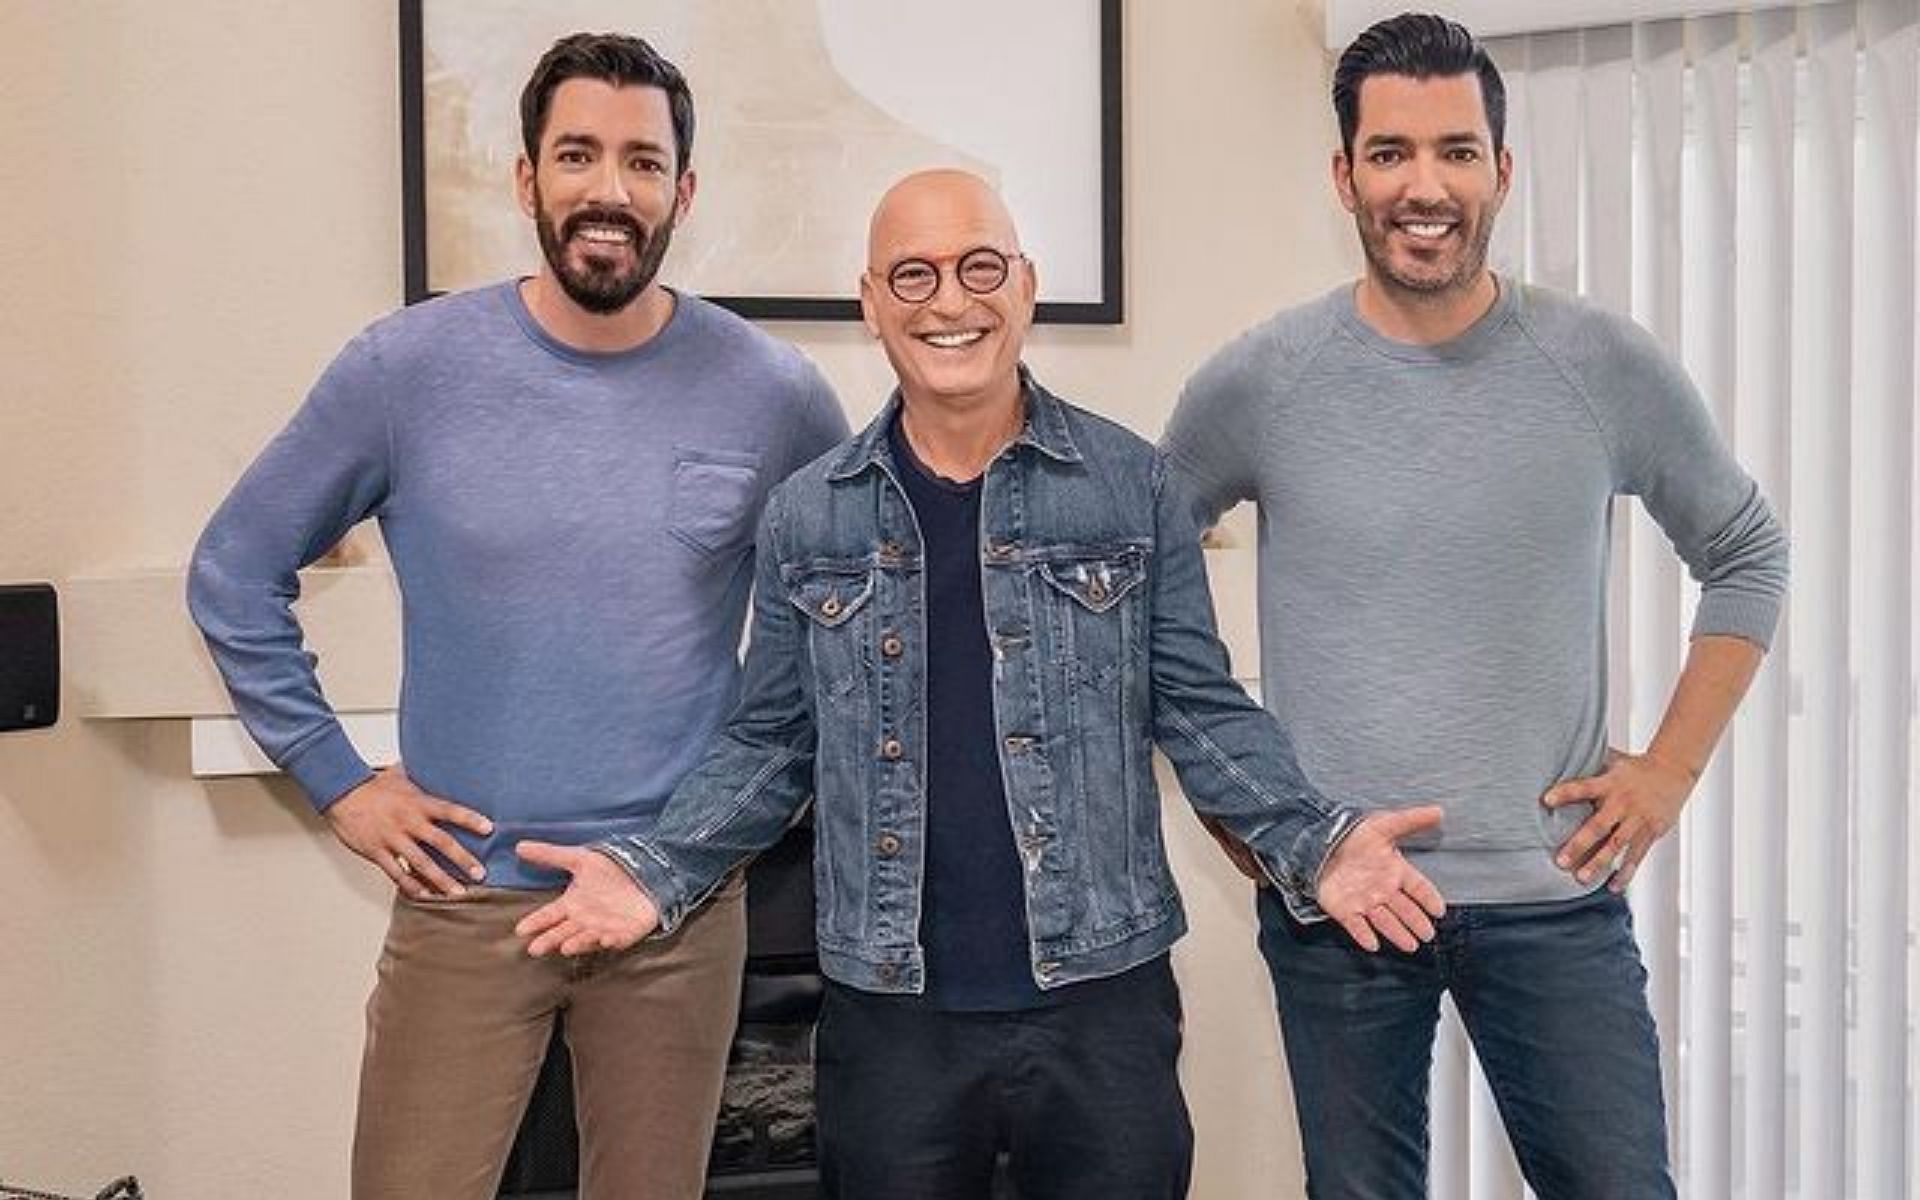  Property Brothers Jonathan Scott and Drew Scott, along with Canadian comedian and AGT judge Howie Mandel, joined hands to renovate Rich Thurber&#039;s bachelor pad (Image via marvel_cabinetry_renovations/Instagram)